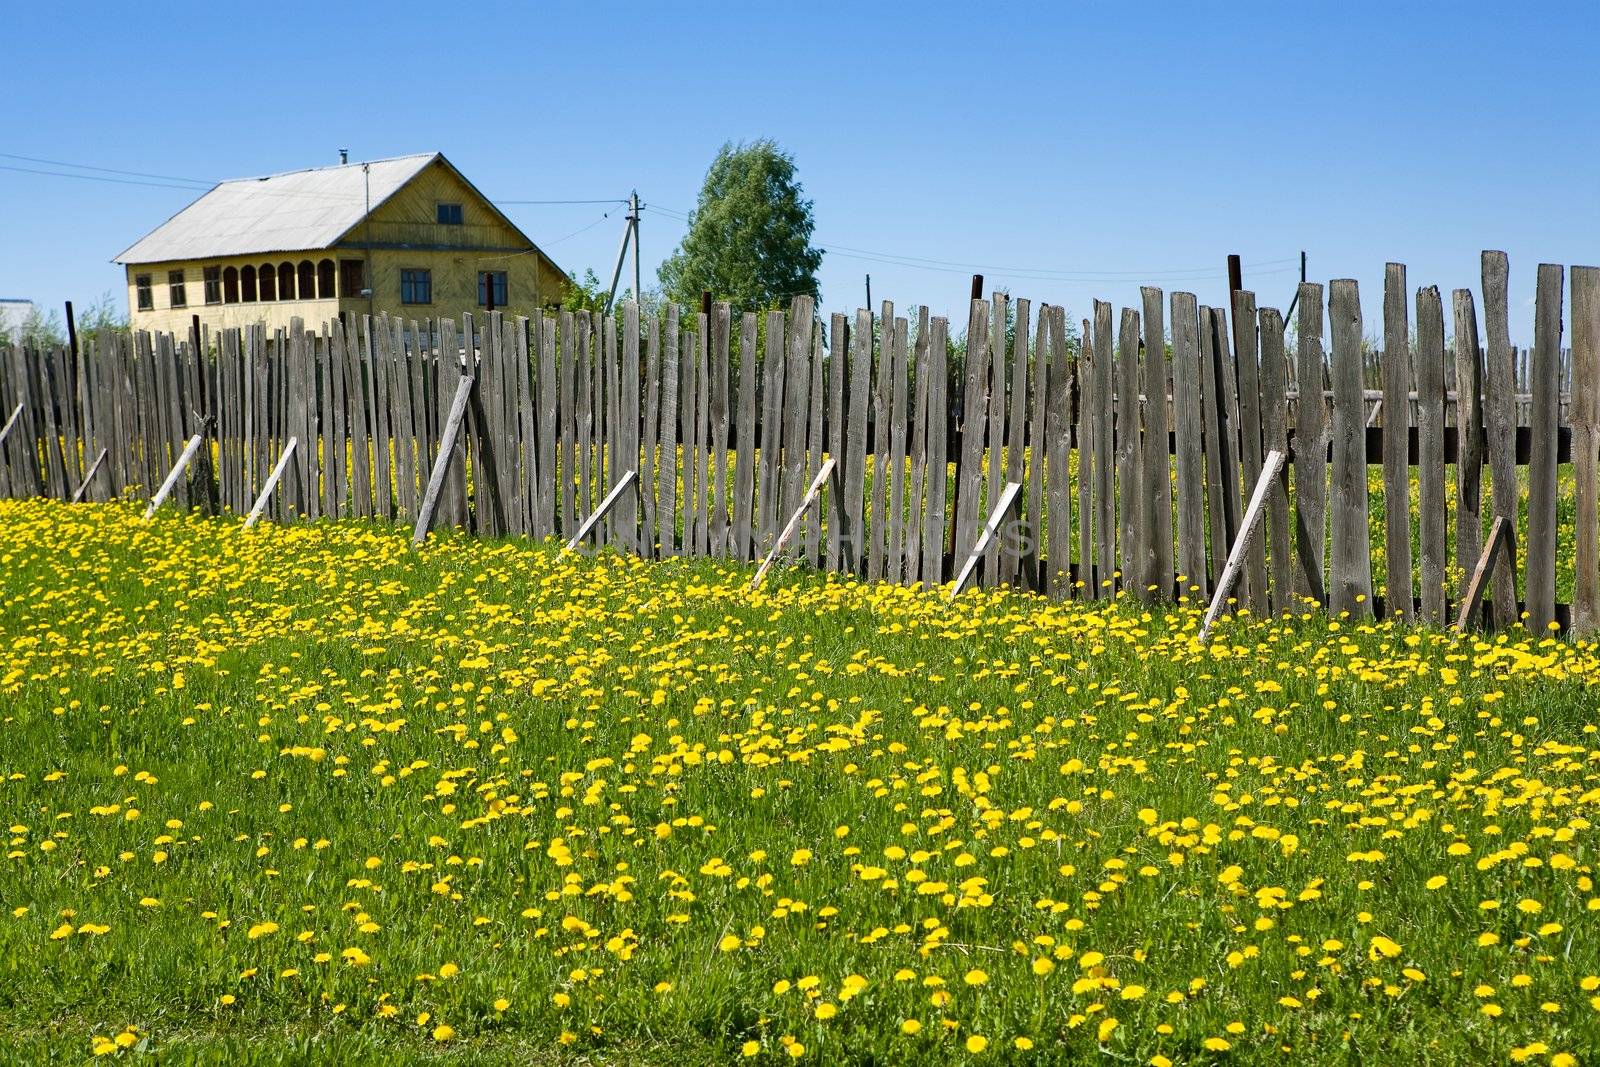 Beautiful rural landscape with a small house, a tree, a wooden fence and a green meadow with yellow flowers in a summer sunny day
